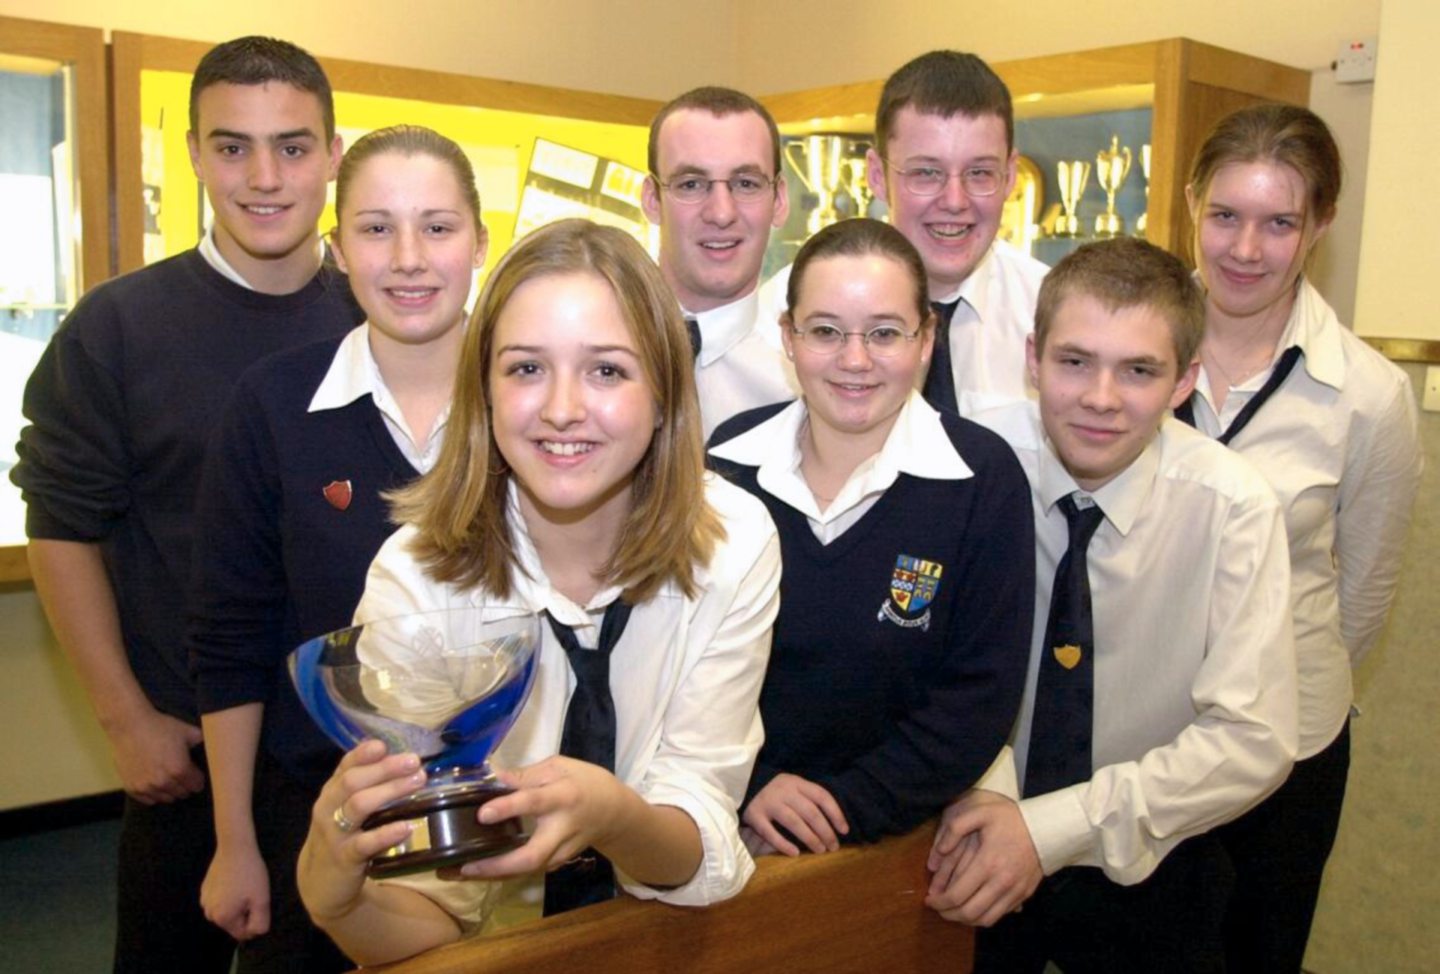 Inverurie Academy pupils posing for photos after receiving a trophy